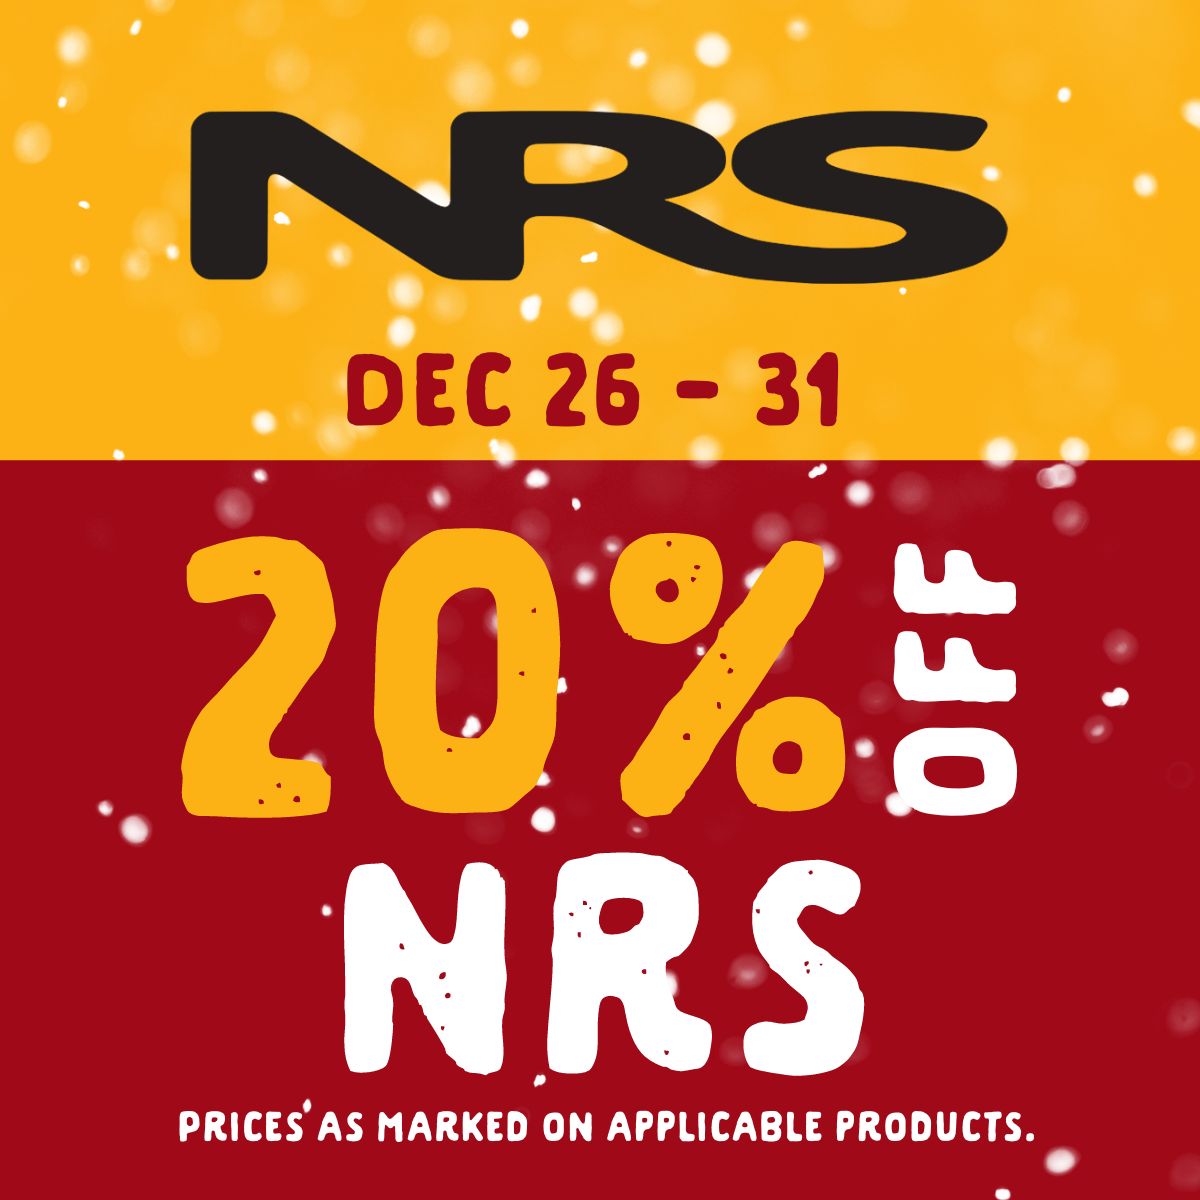 20% off NRS from December 26 to 31. Prices as marked on applicable products.